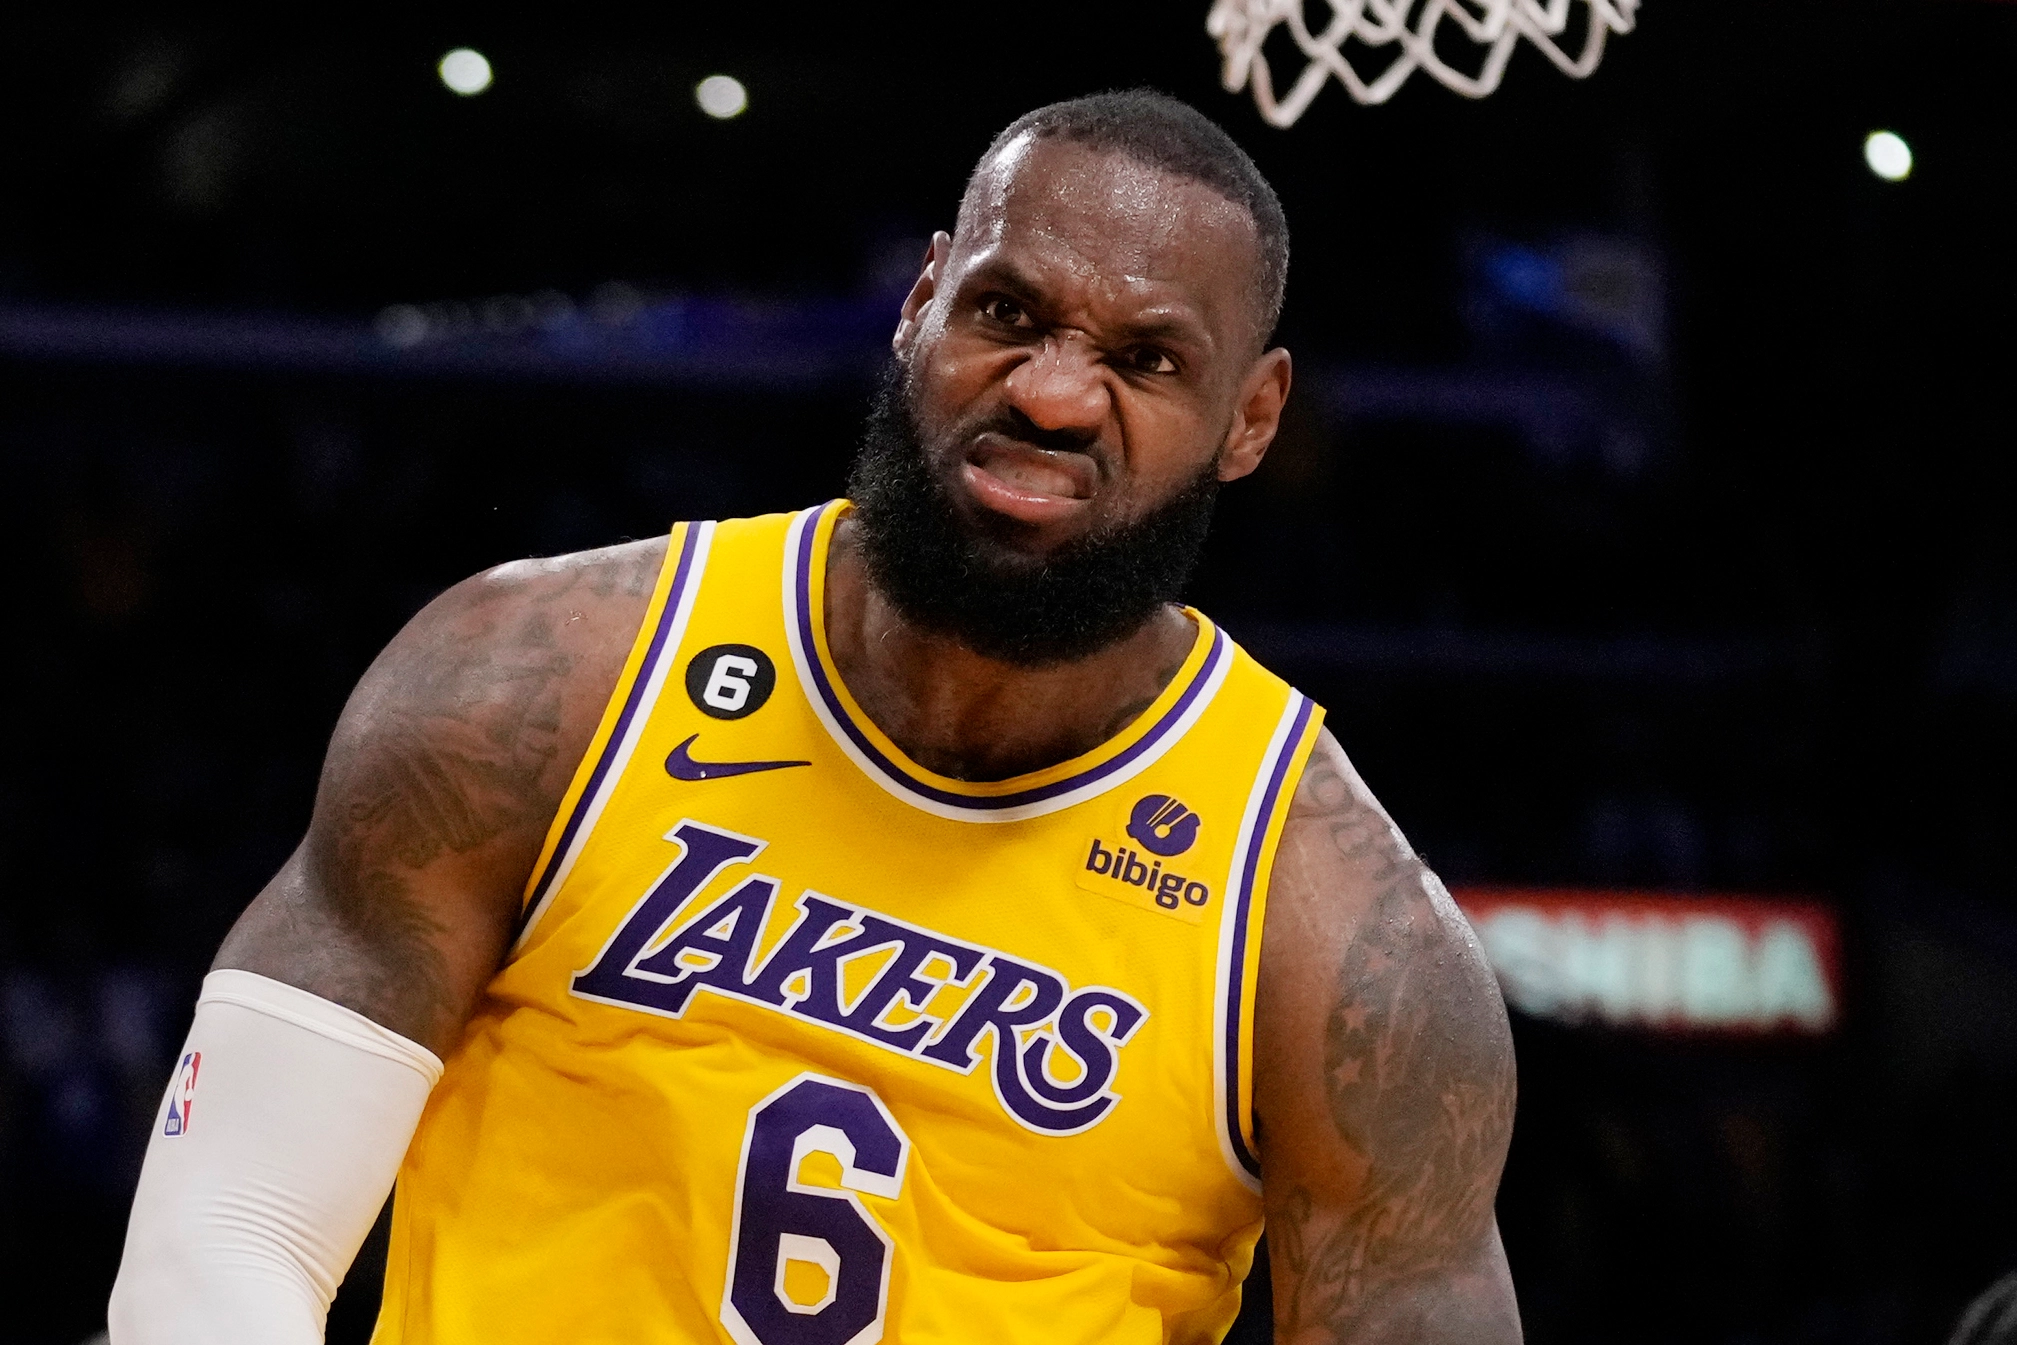 LeBron James could have one last challenge after leaving the Lakers